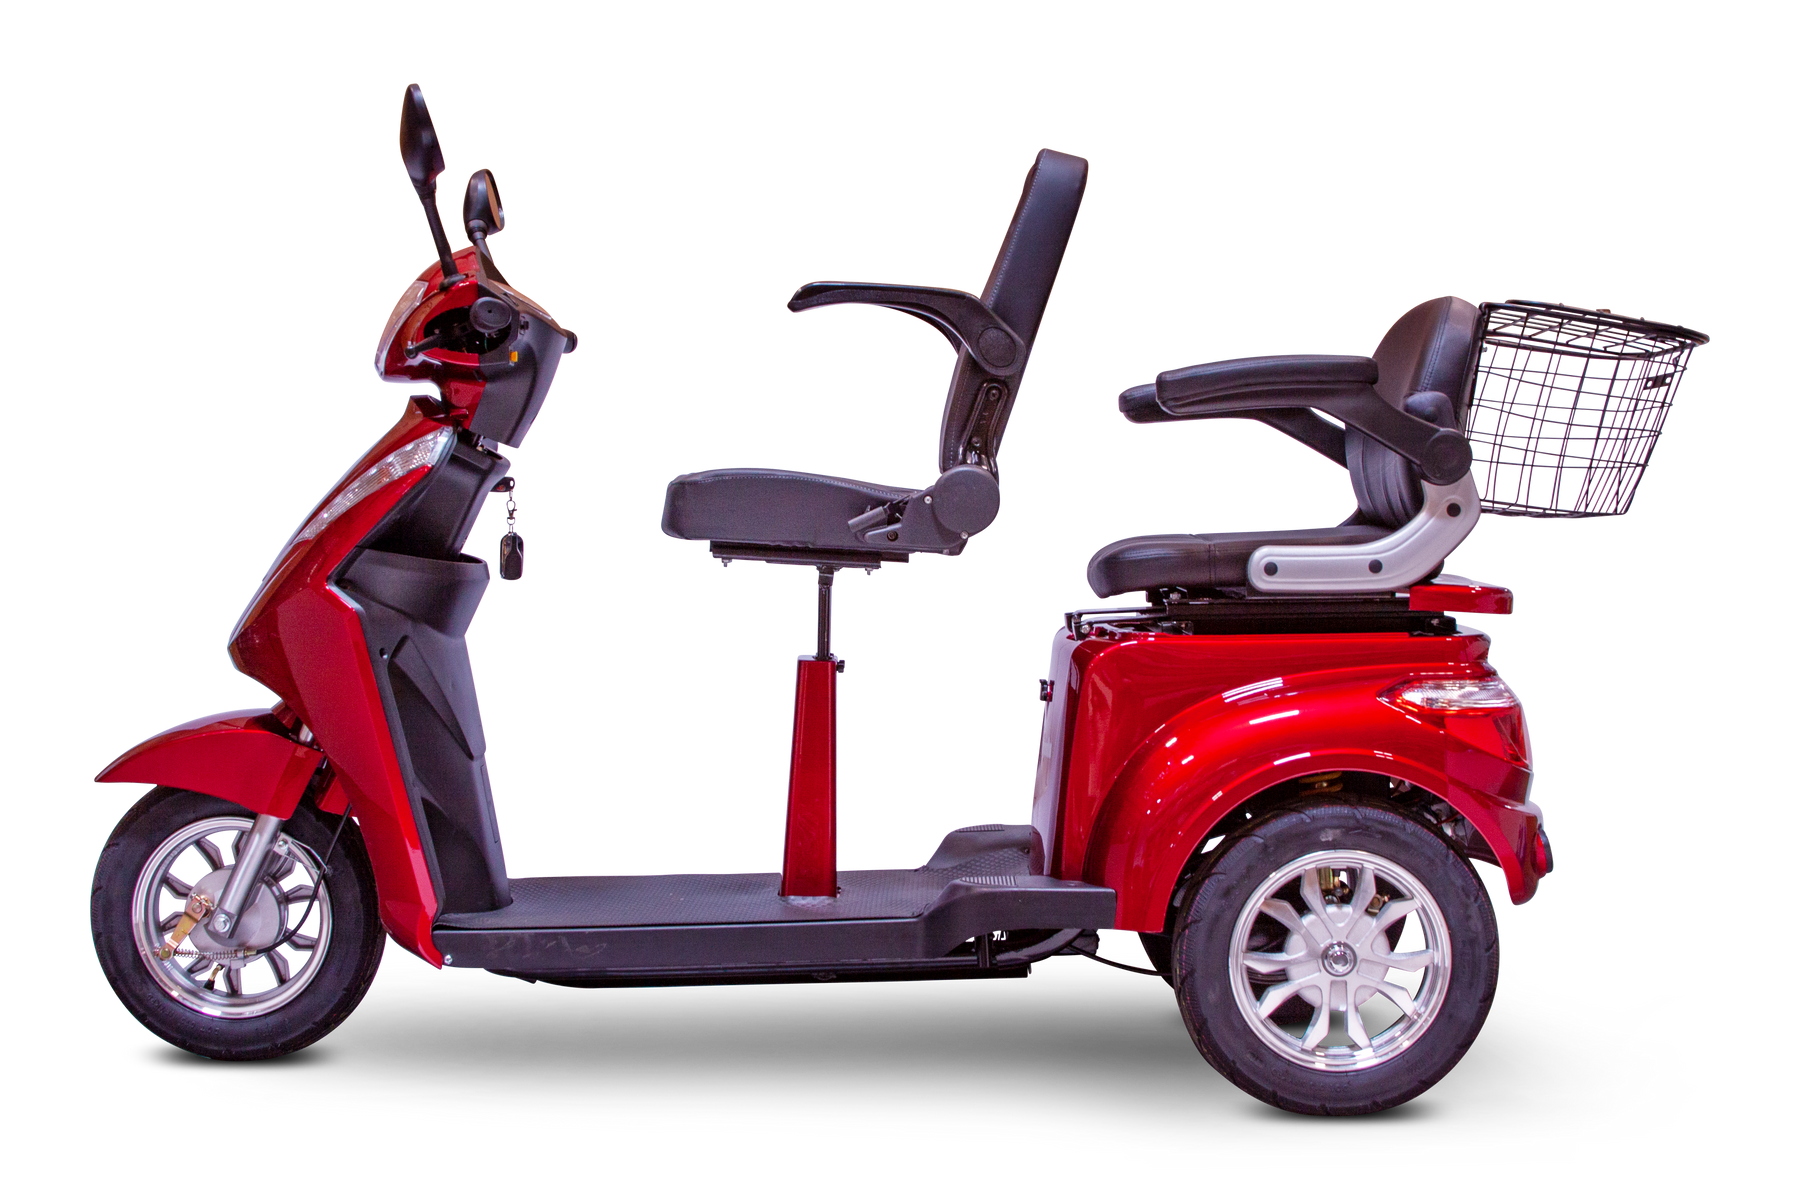 ew-66 2 seater scooter 3